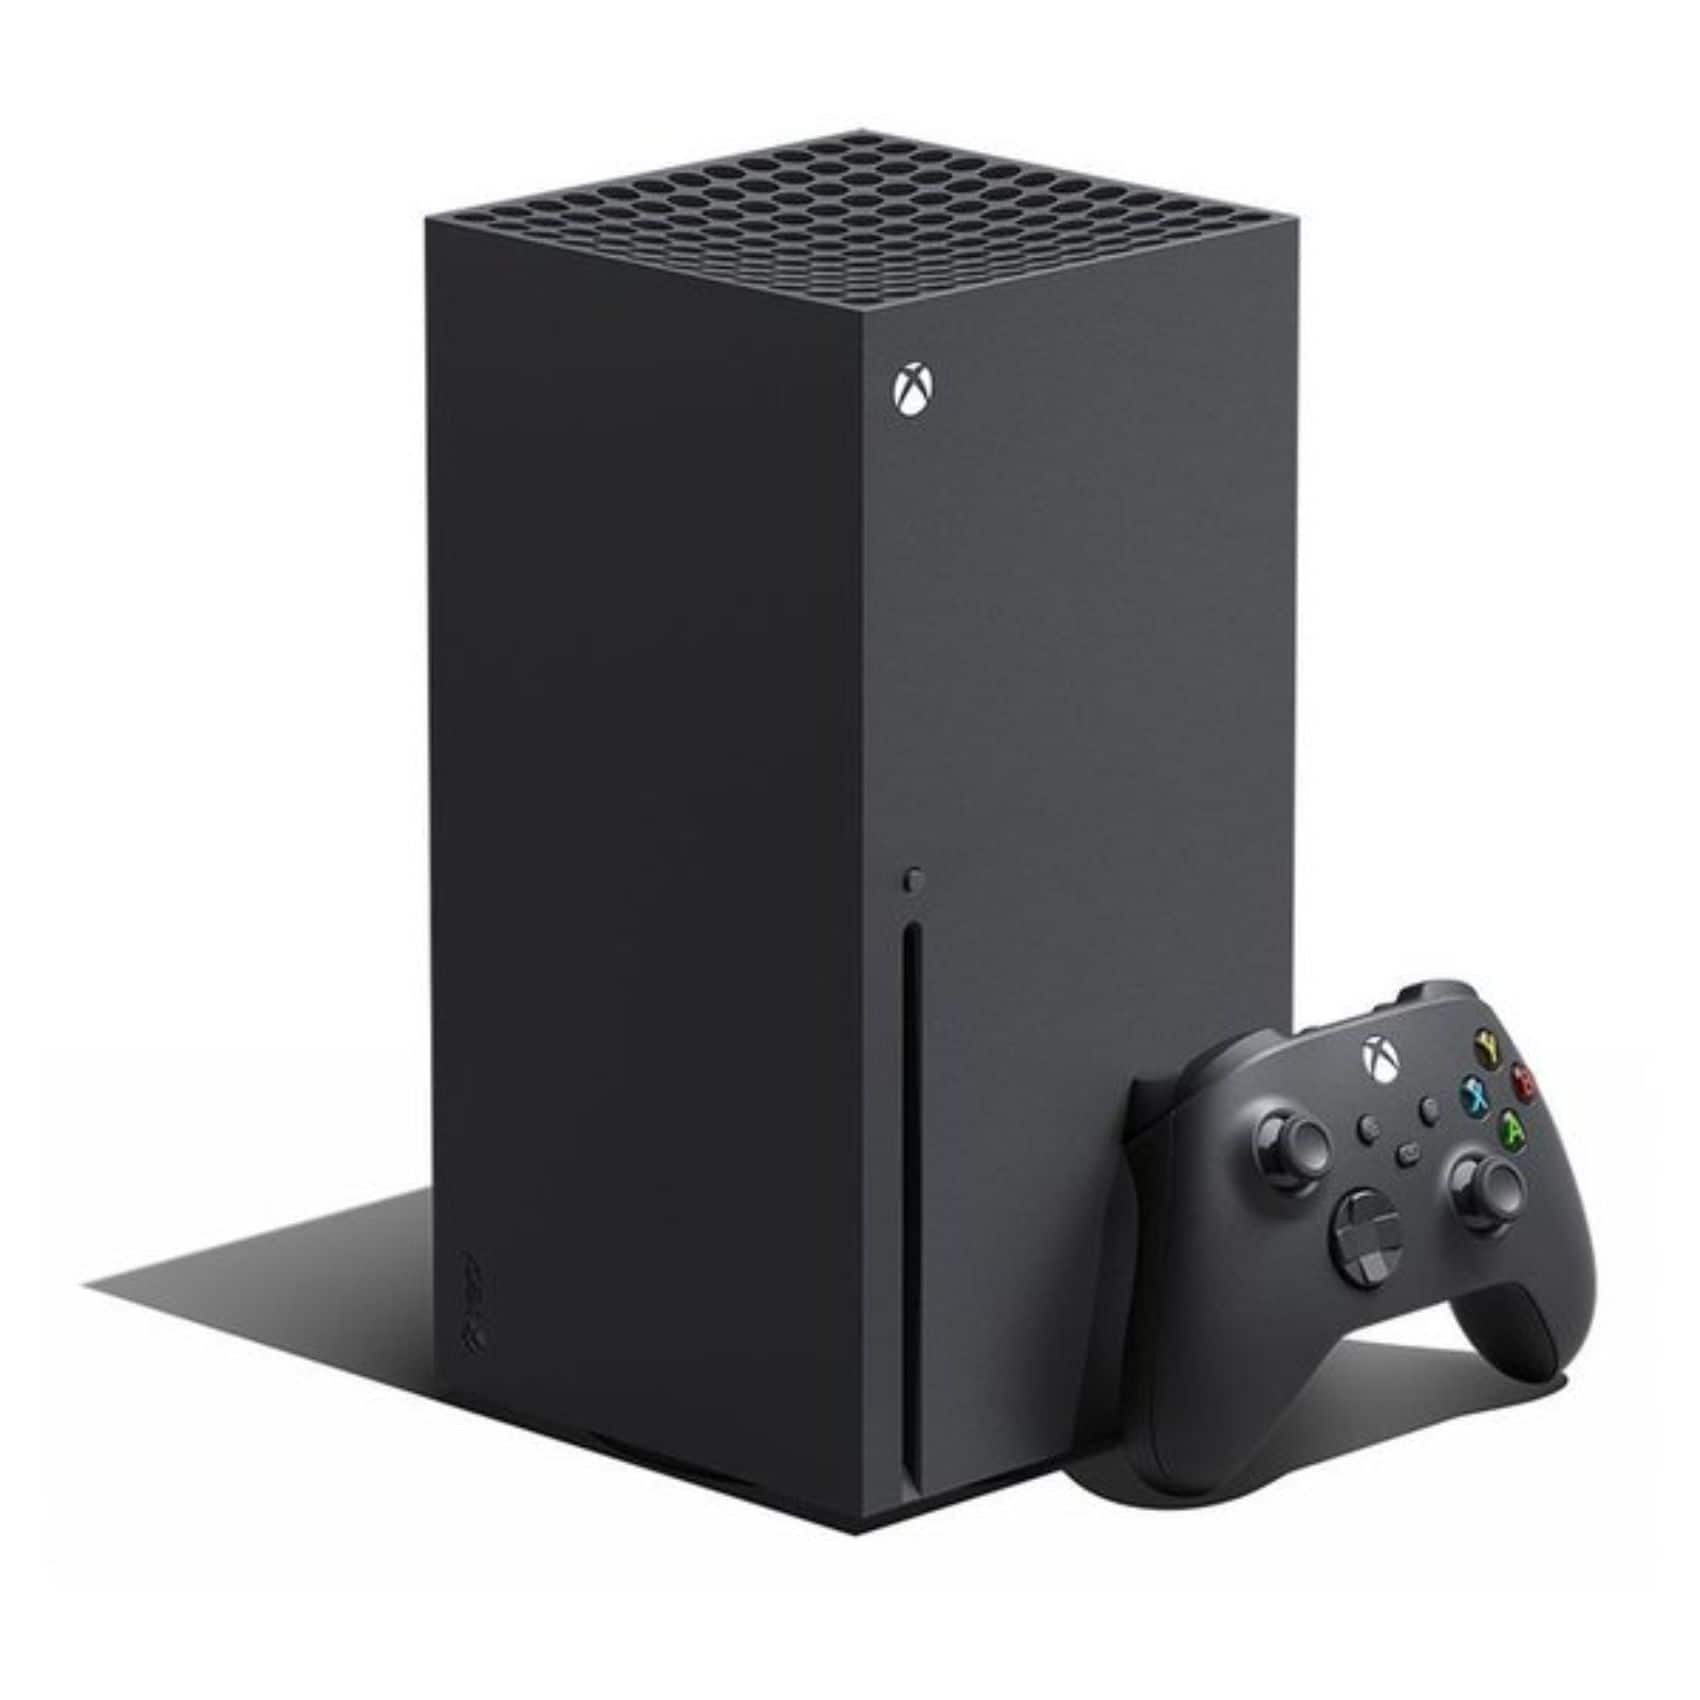  Will Xbox Series X Work Without Internet for Streaming